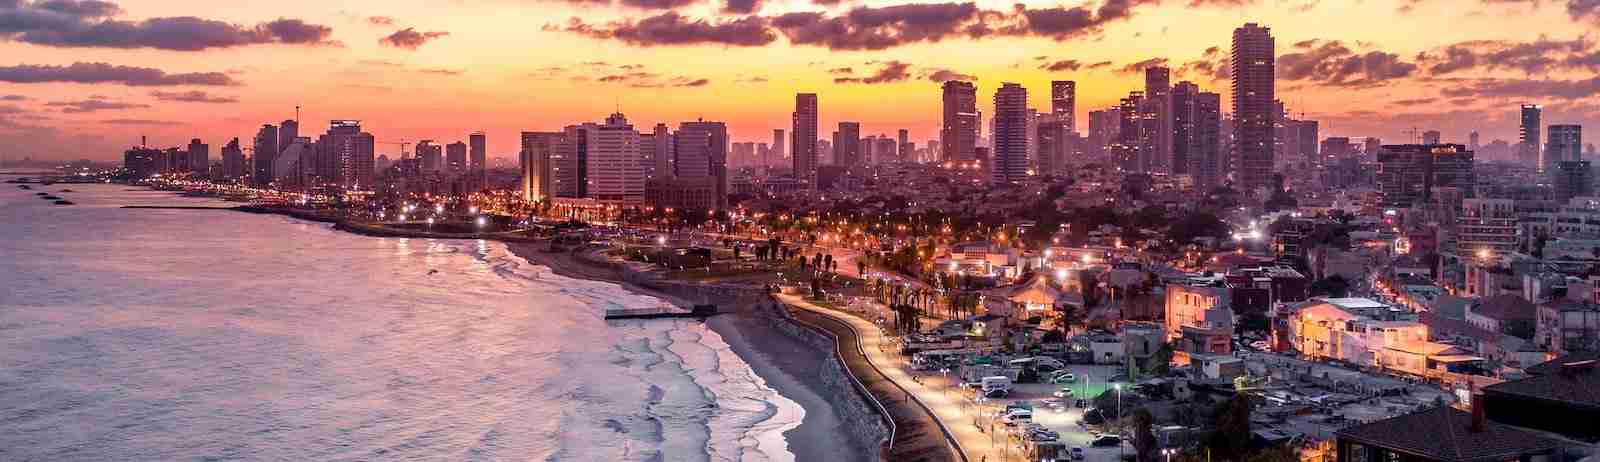 innovation in israel, landscape image of tel aviv and it's buildings on the water